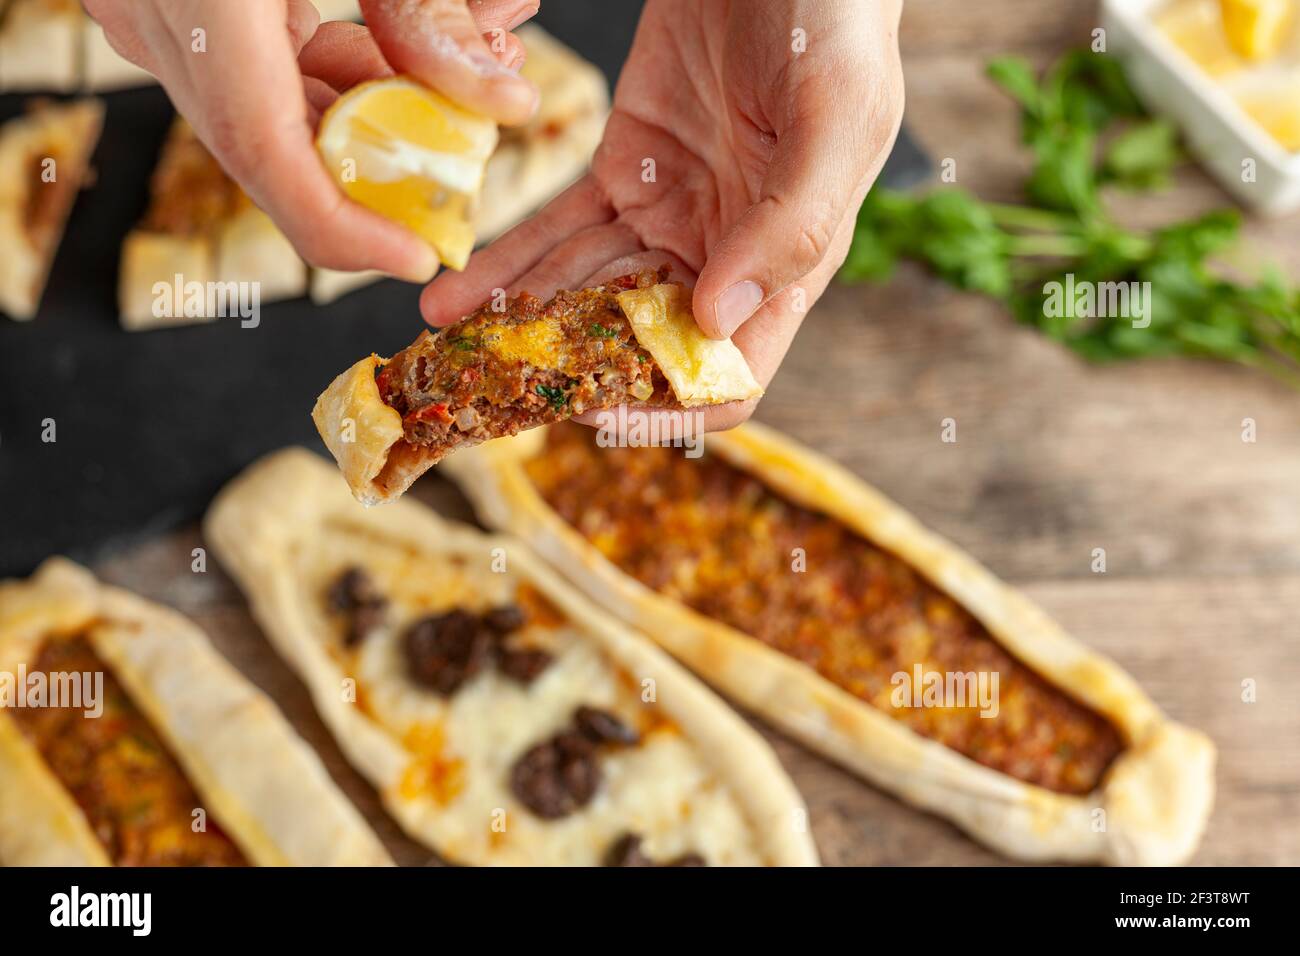 Kasarli sucuklu pide and kiymali pide are traditional Turkish flatbreads similar to pizza with meat and cheese toppings. They are served with lemon an Stock Photo